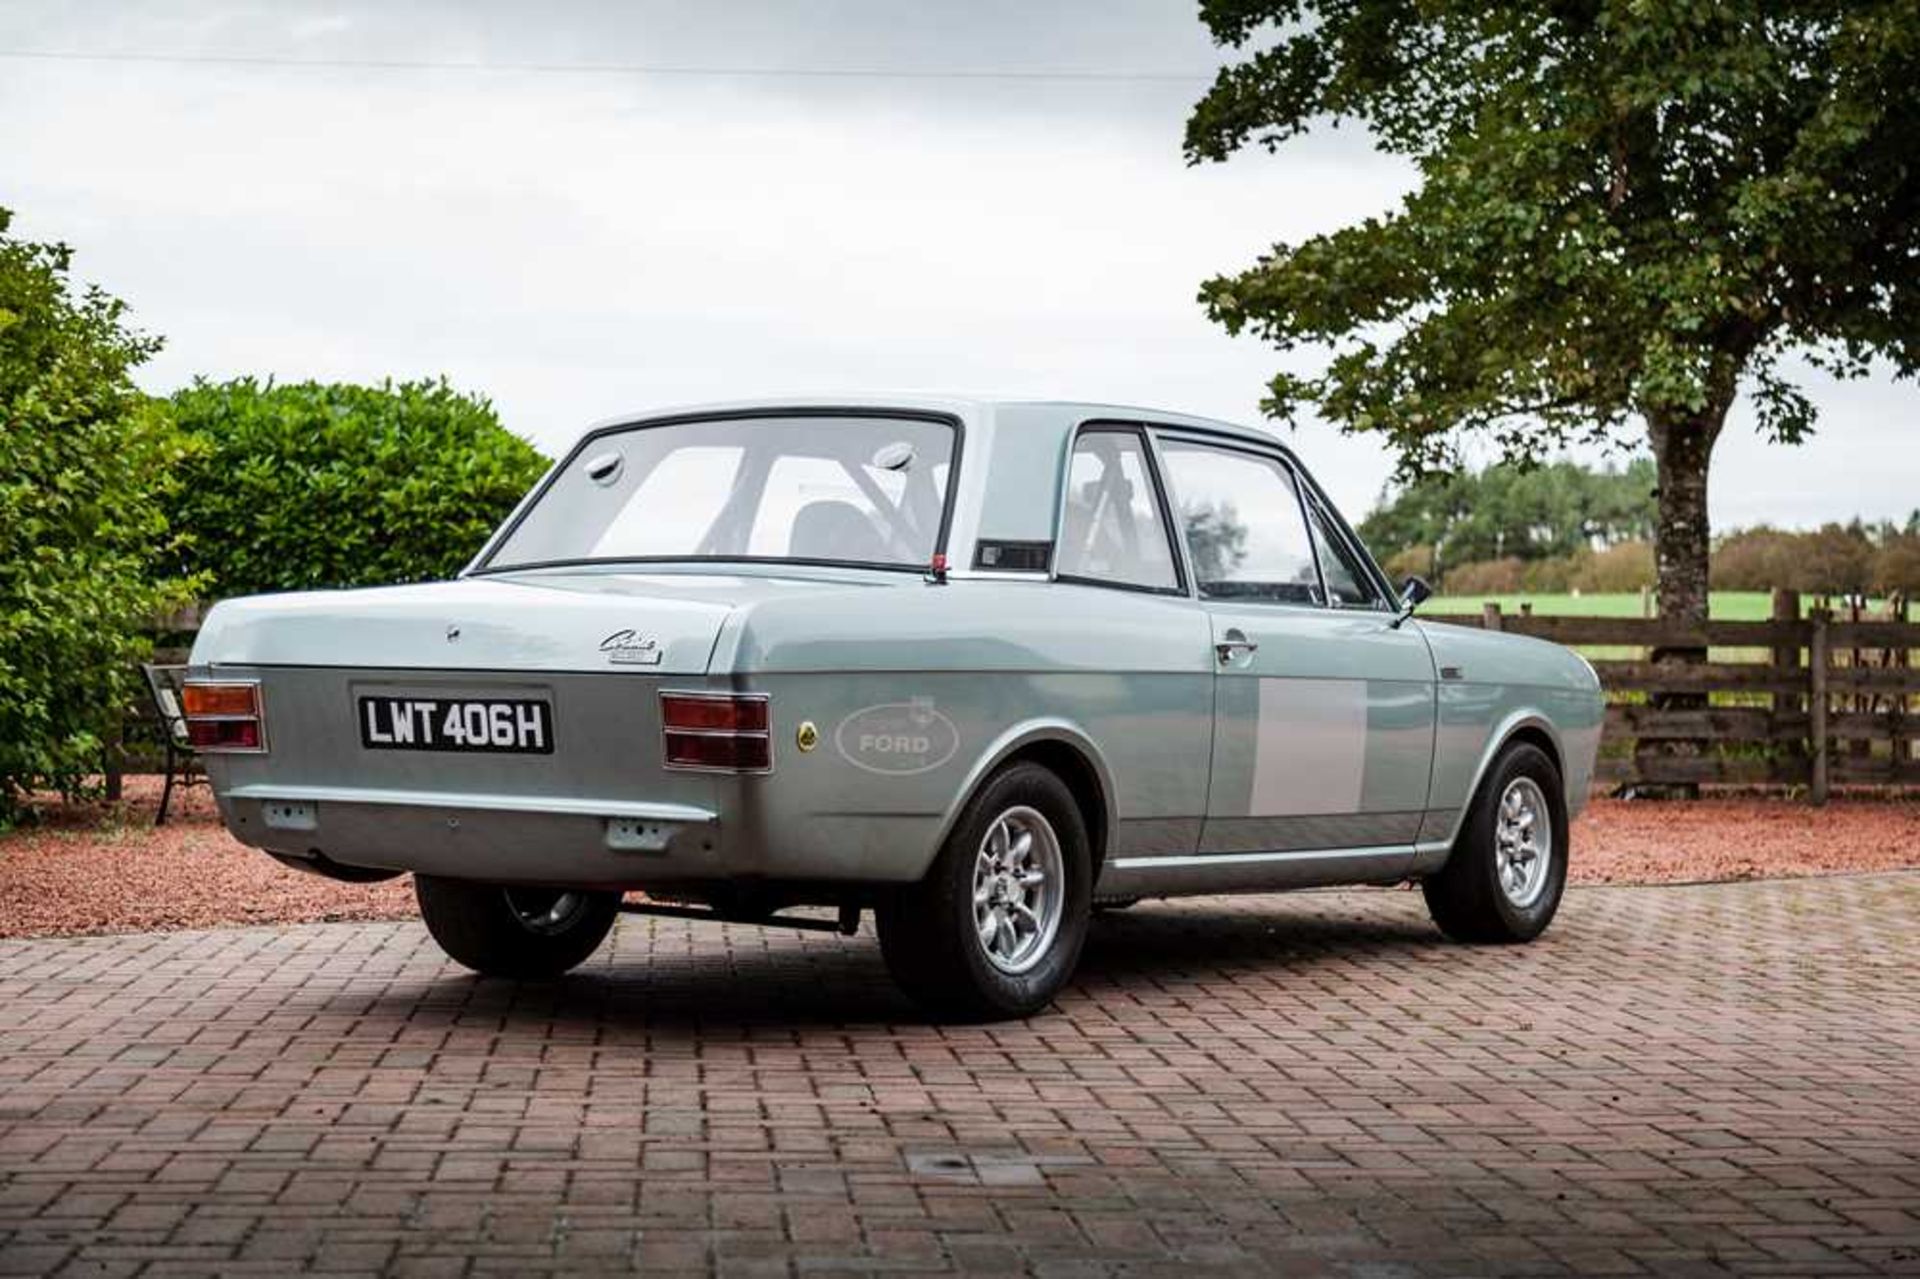 1969 Ford Cortina 'Lotus' Competition Saloon Powered by a 1598cc FIA-legal Lotus Twin-Cam with Twin - Image 4 of 55